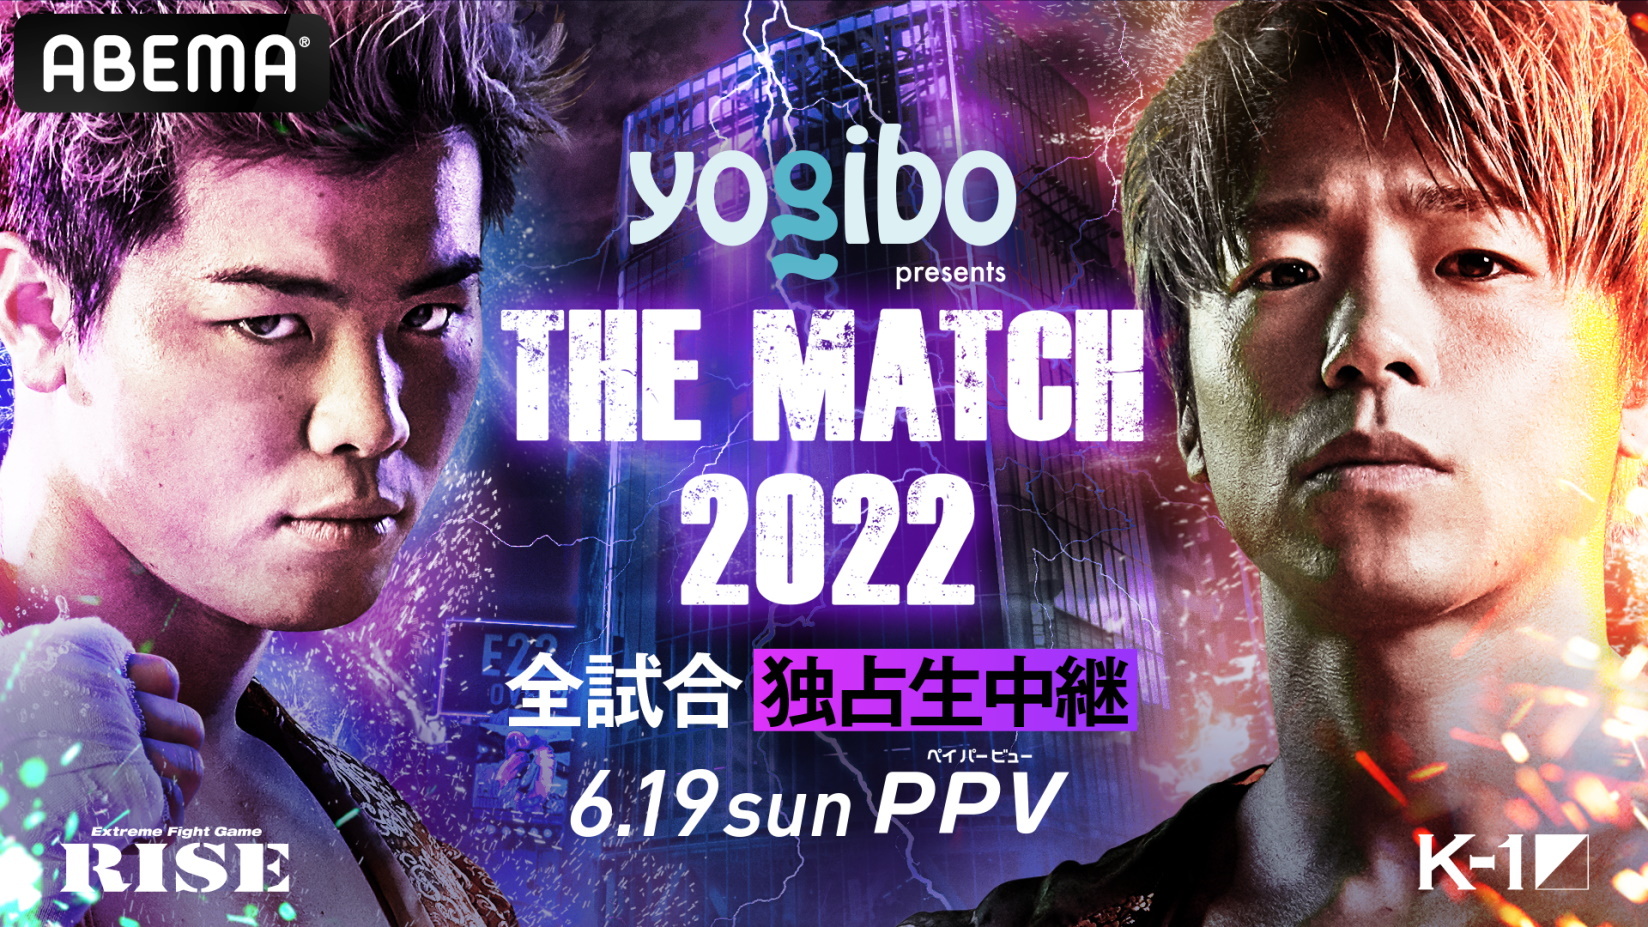 ABEMA, the Exclusive Live PPV Broadcaster of All Matches in Historic Fight  Event Yogibo presents THE MATCH 2022 Sold Over 500,000 PPV Tickets |  CyberAgent, Inc.